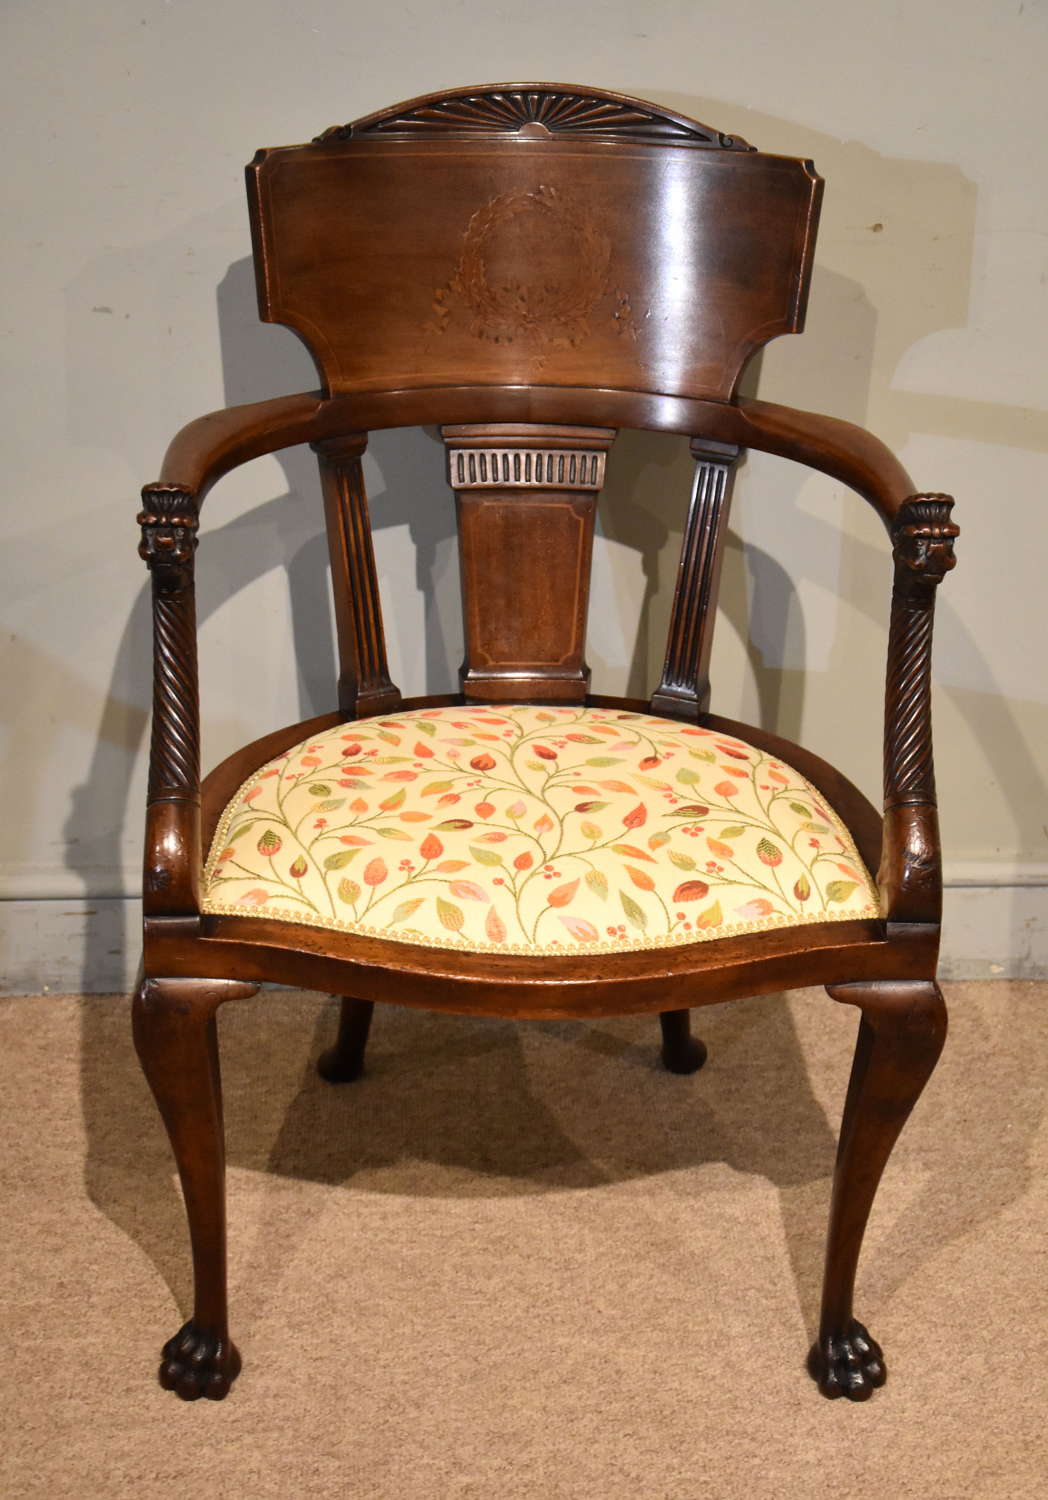 Late 19th century French mahogany and marquetry elbow chair